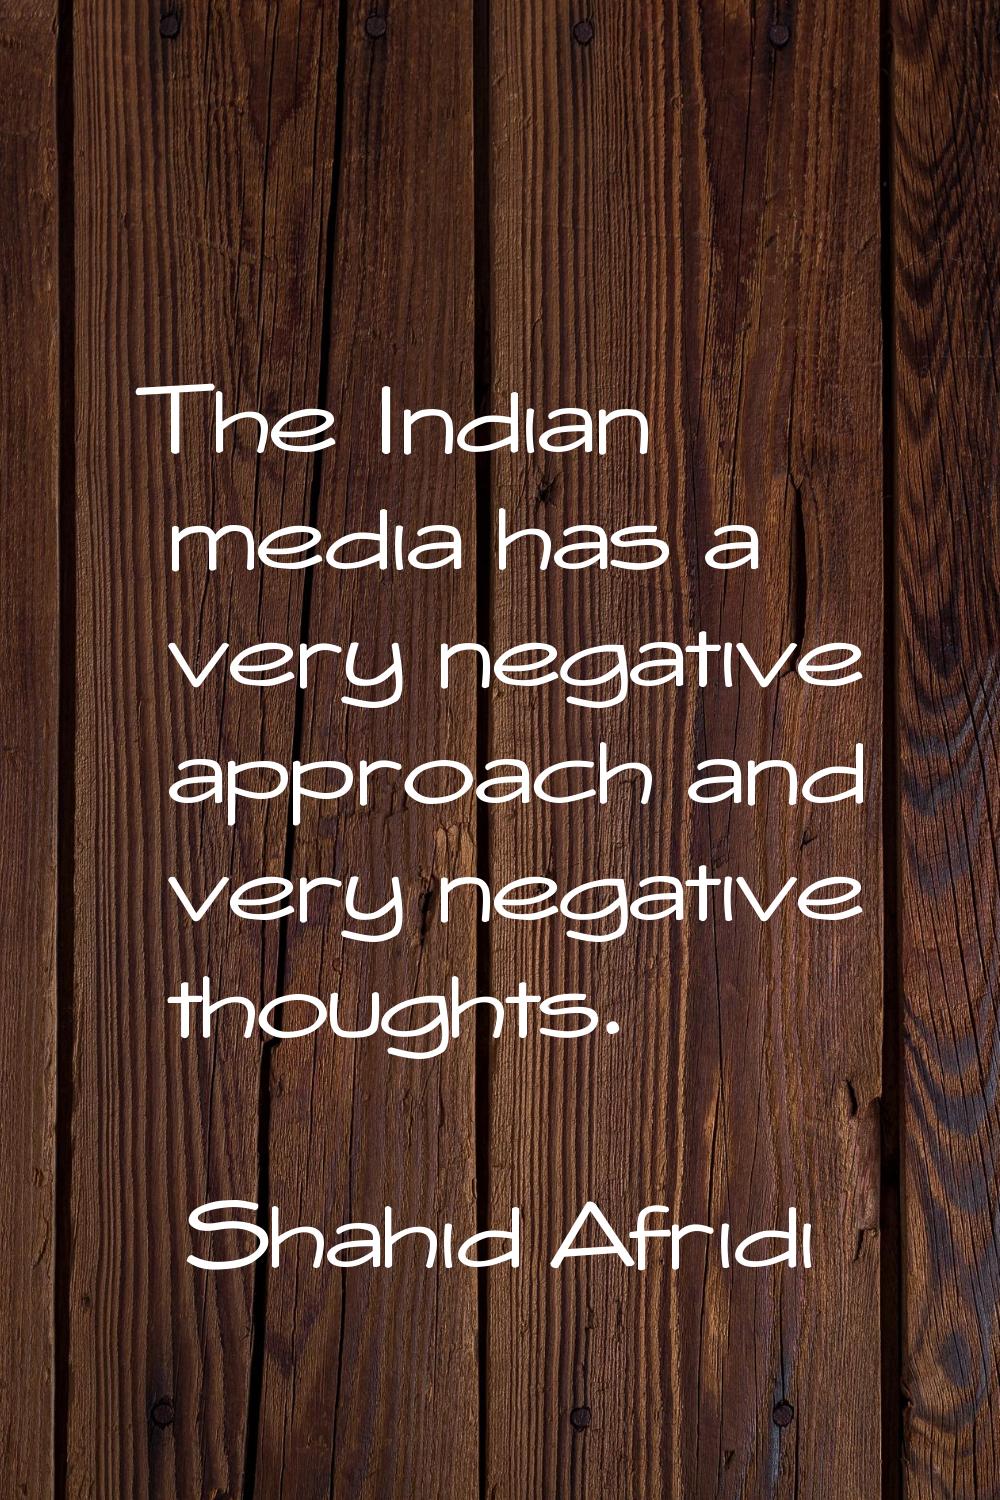 The Indian media has a very negative approach and very negative thoughts.